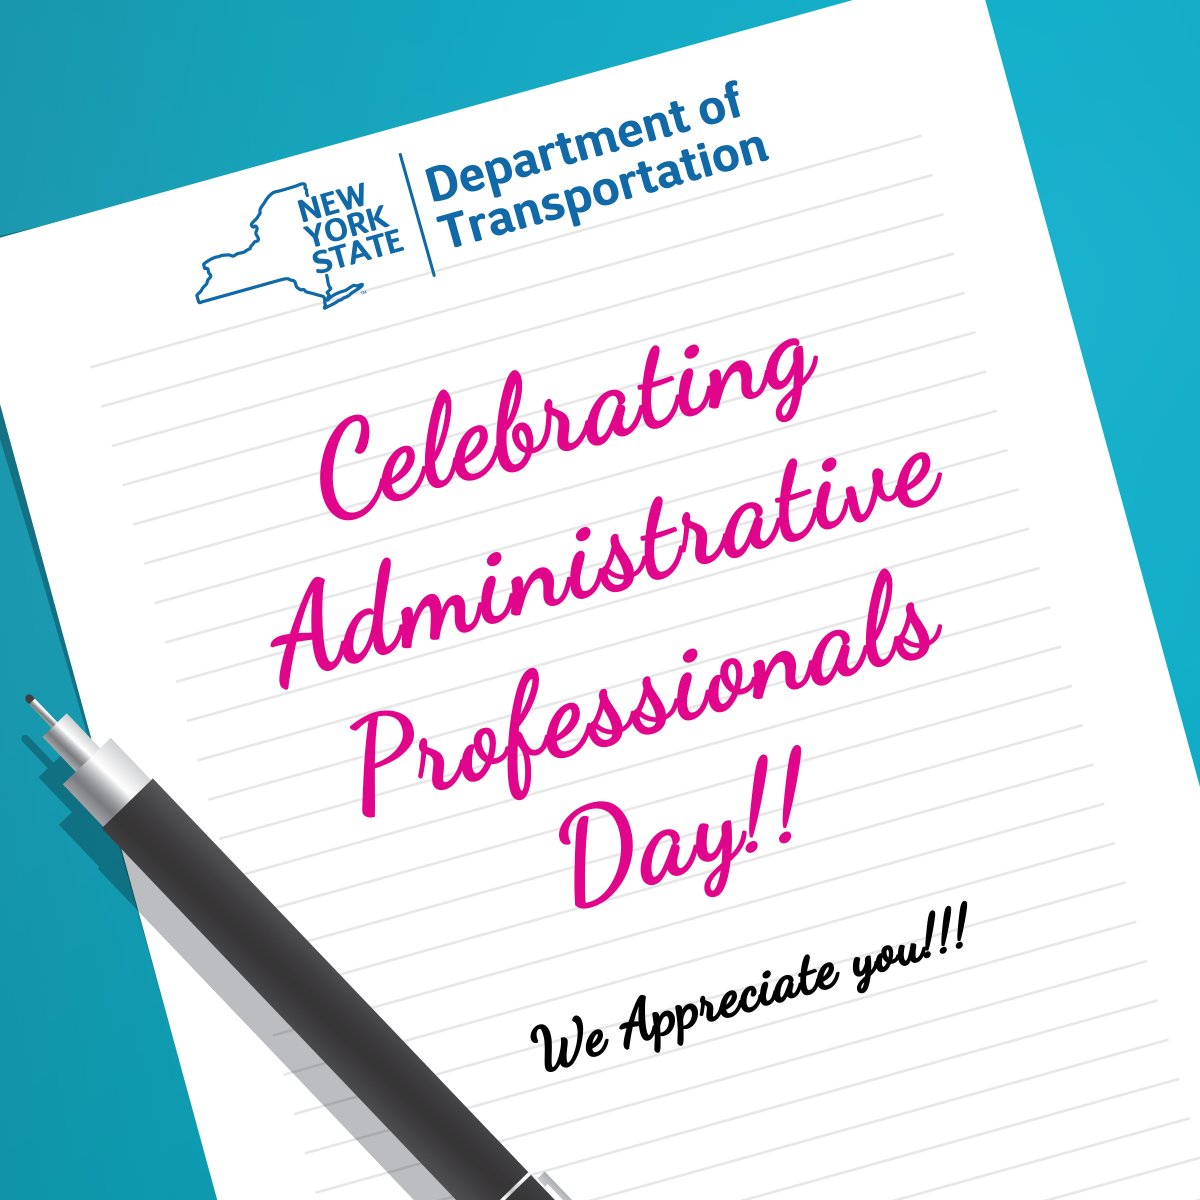 Thank you to all the NYSDOT Administrative Professionals who work tirelessly day in and day out to keep NY moving! Your hard work, dedication, attention to detail, and exceptional organizational skills do not go unnoticed! #OurStaffRocks #OneDOT